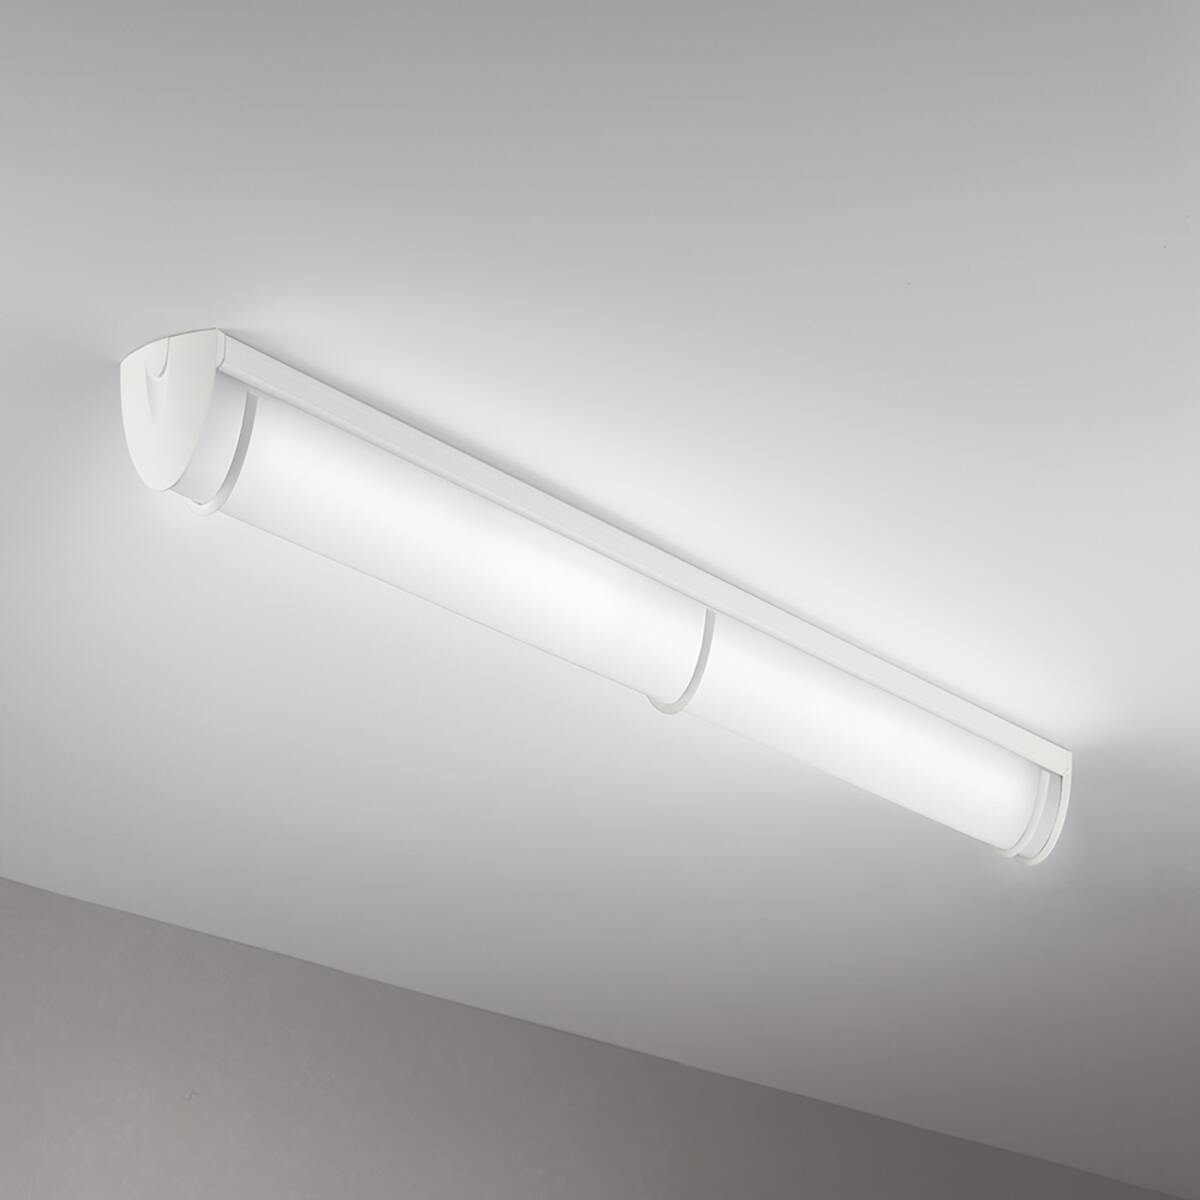 A luminous surface-mounted luminaire with a curved linear diffuser body and trim accents